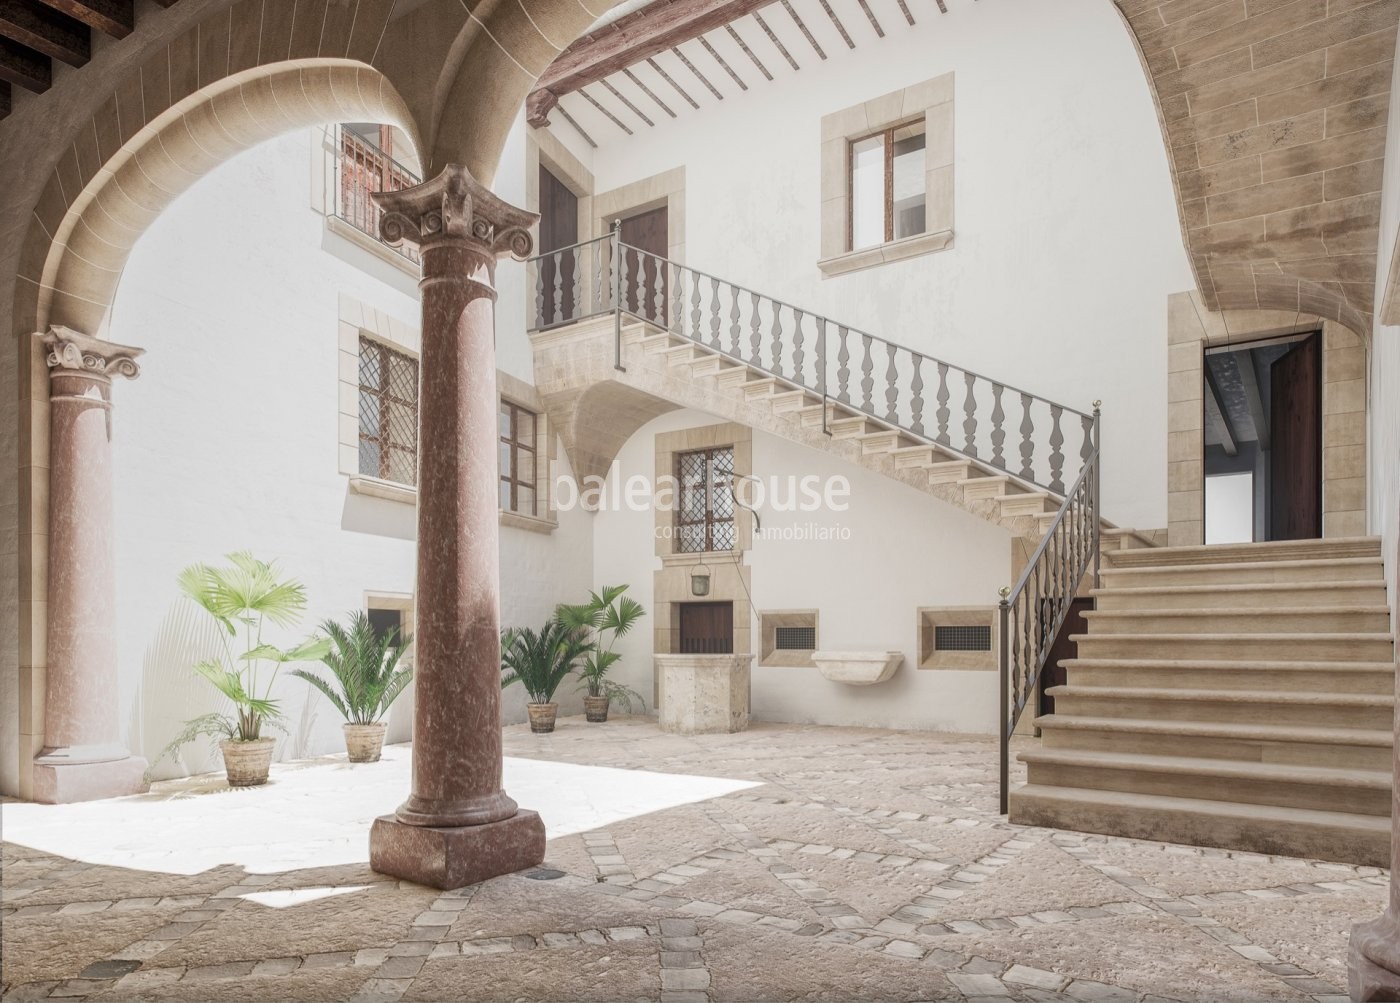 Elegant duplex flat in historic palace in the old town of Palma.